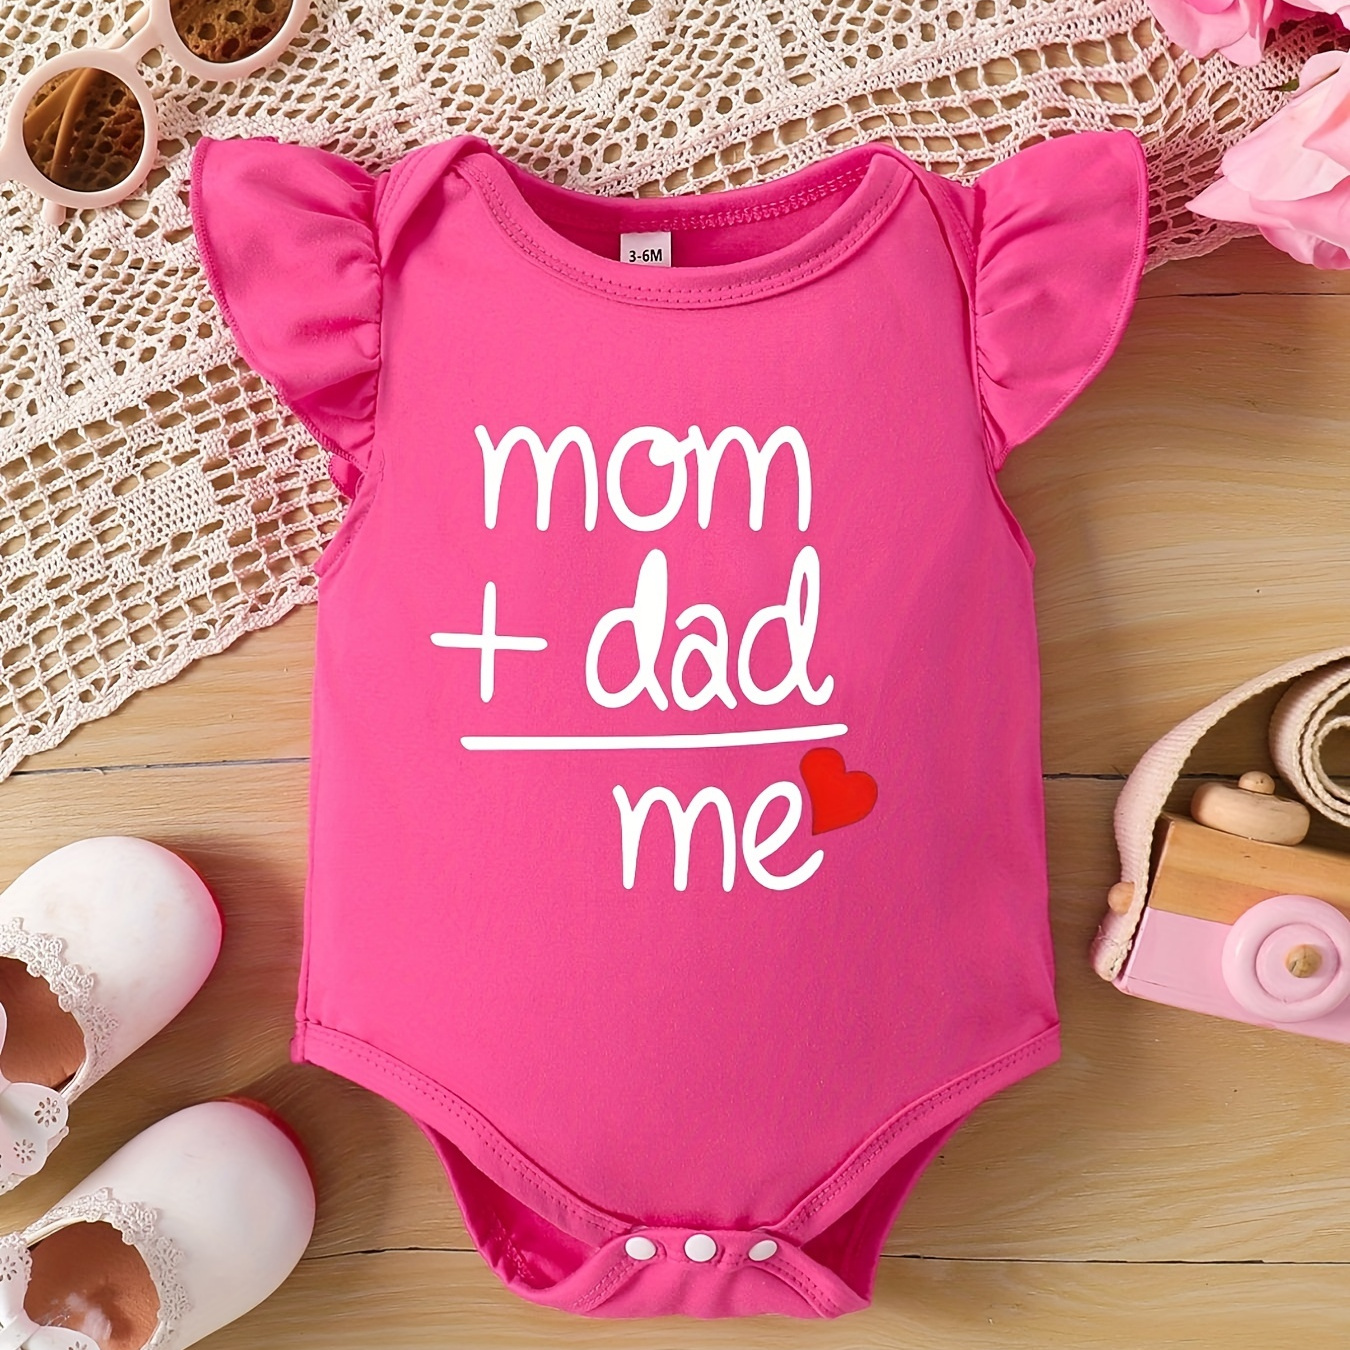 

Baby's "mom+dad=me" Print Triangle Bodysuit, Casual Cap Sleeve Romper, Toddler & Infant Girl's Onesie For Summer, As Gift